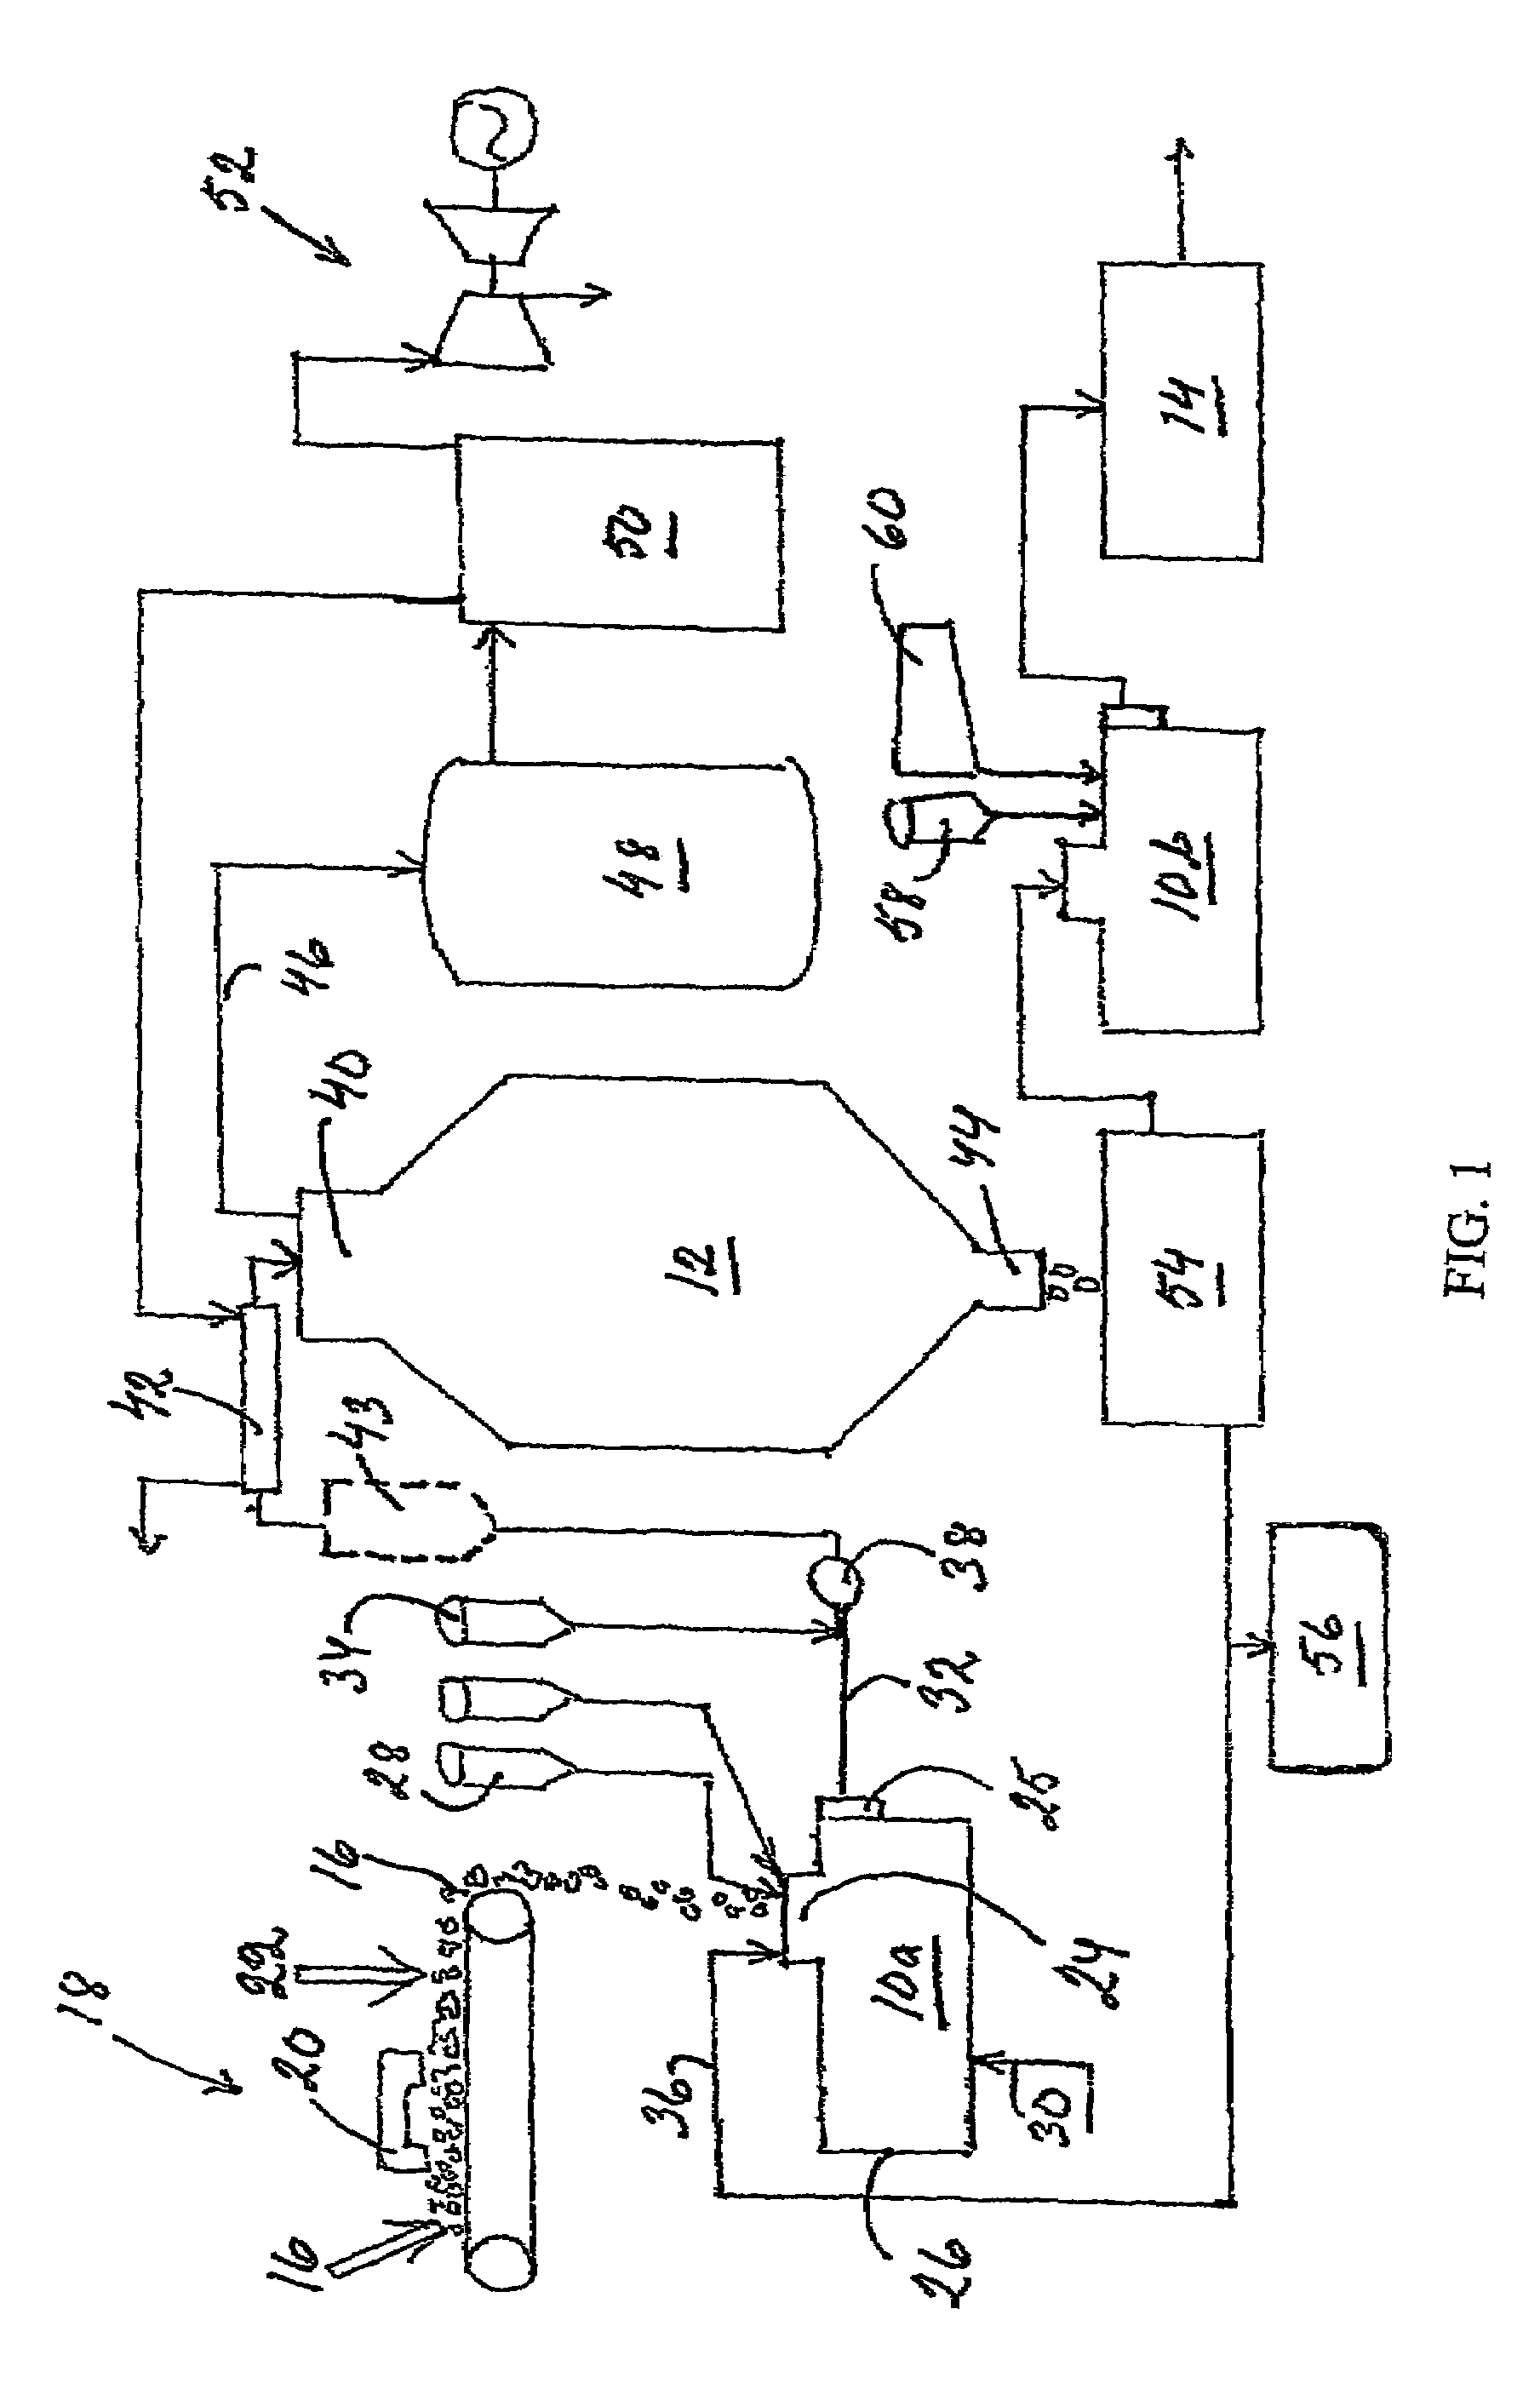 Method and device for disintegration of organic material and use of the device